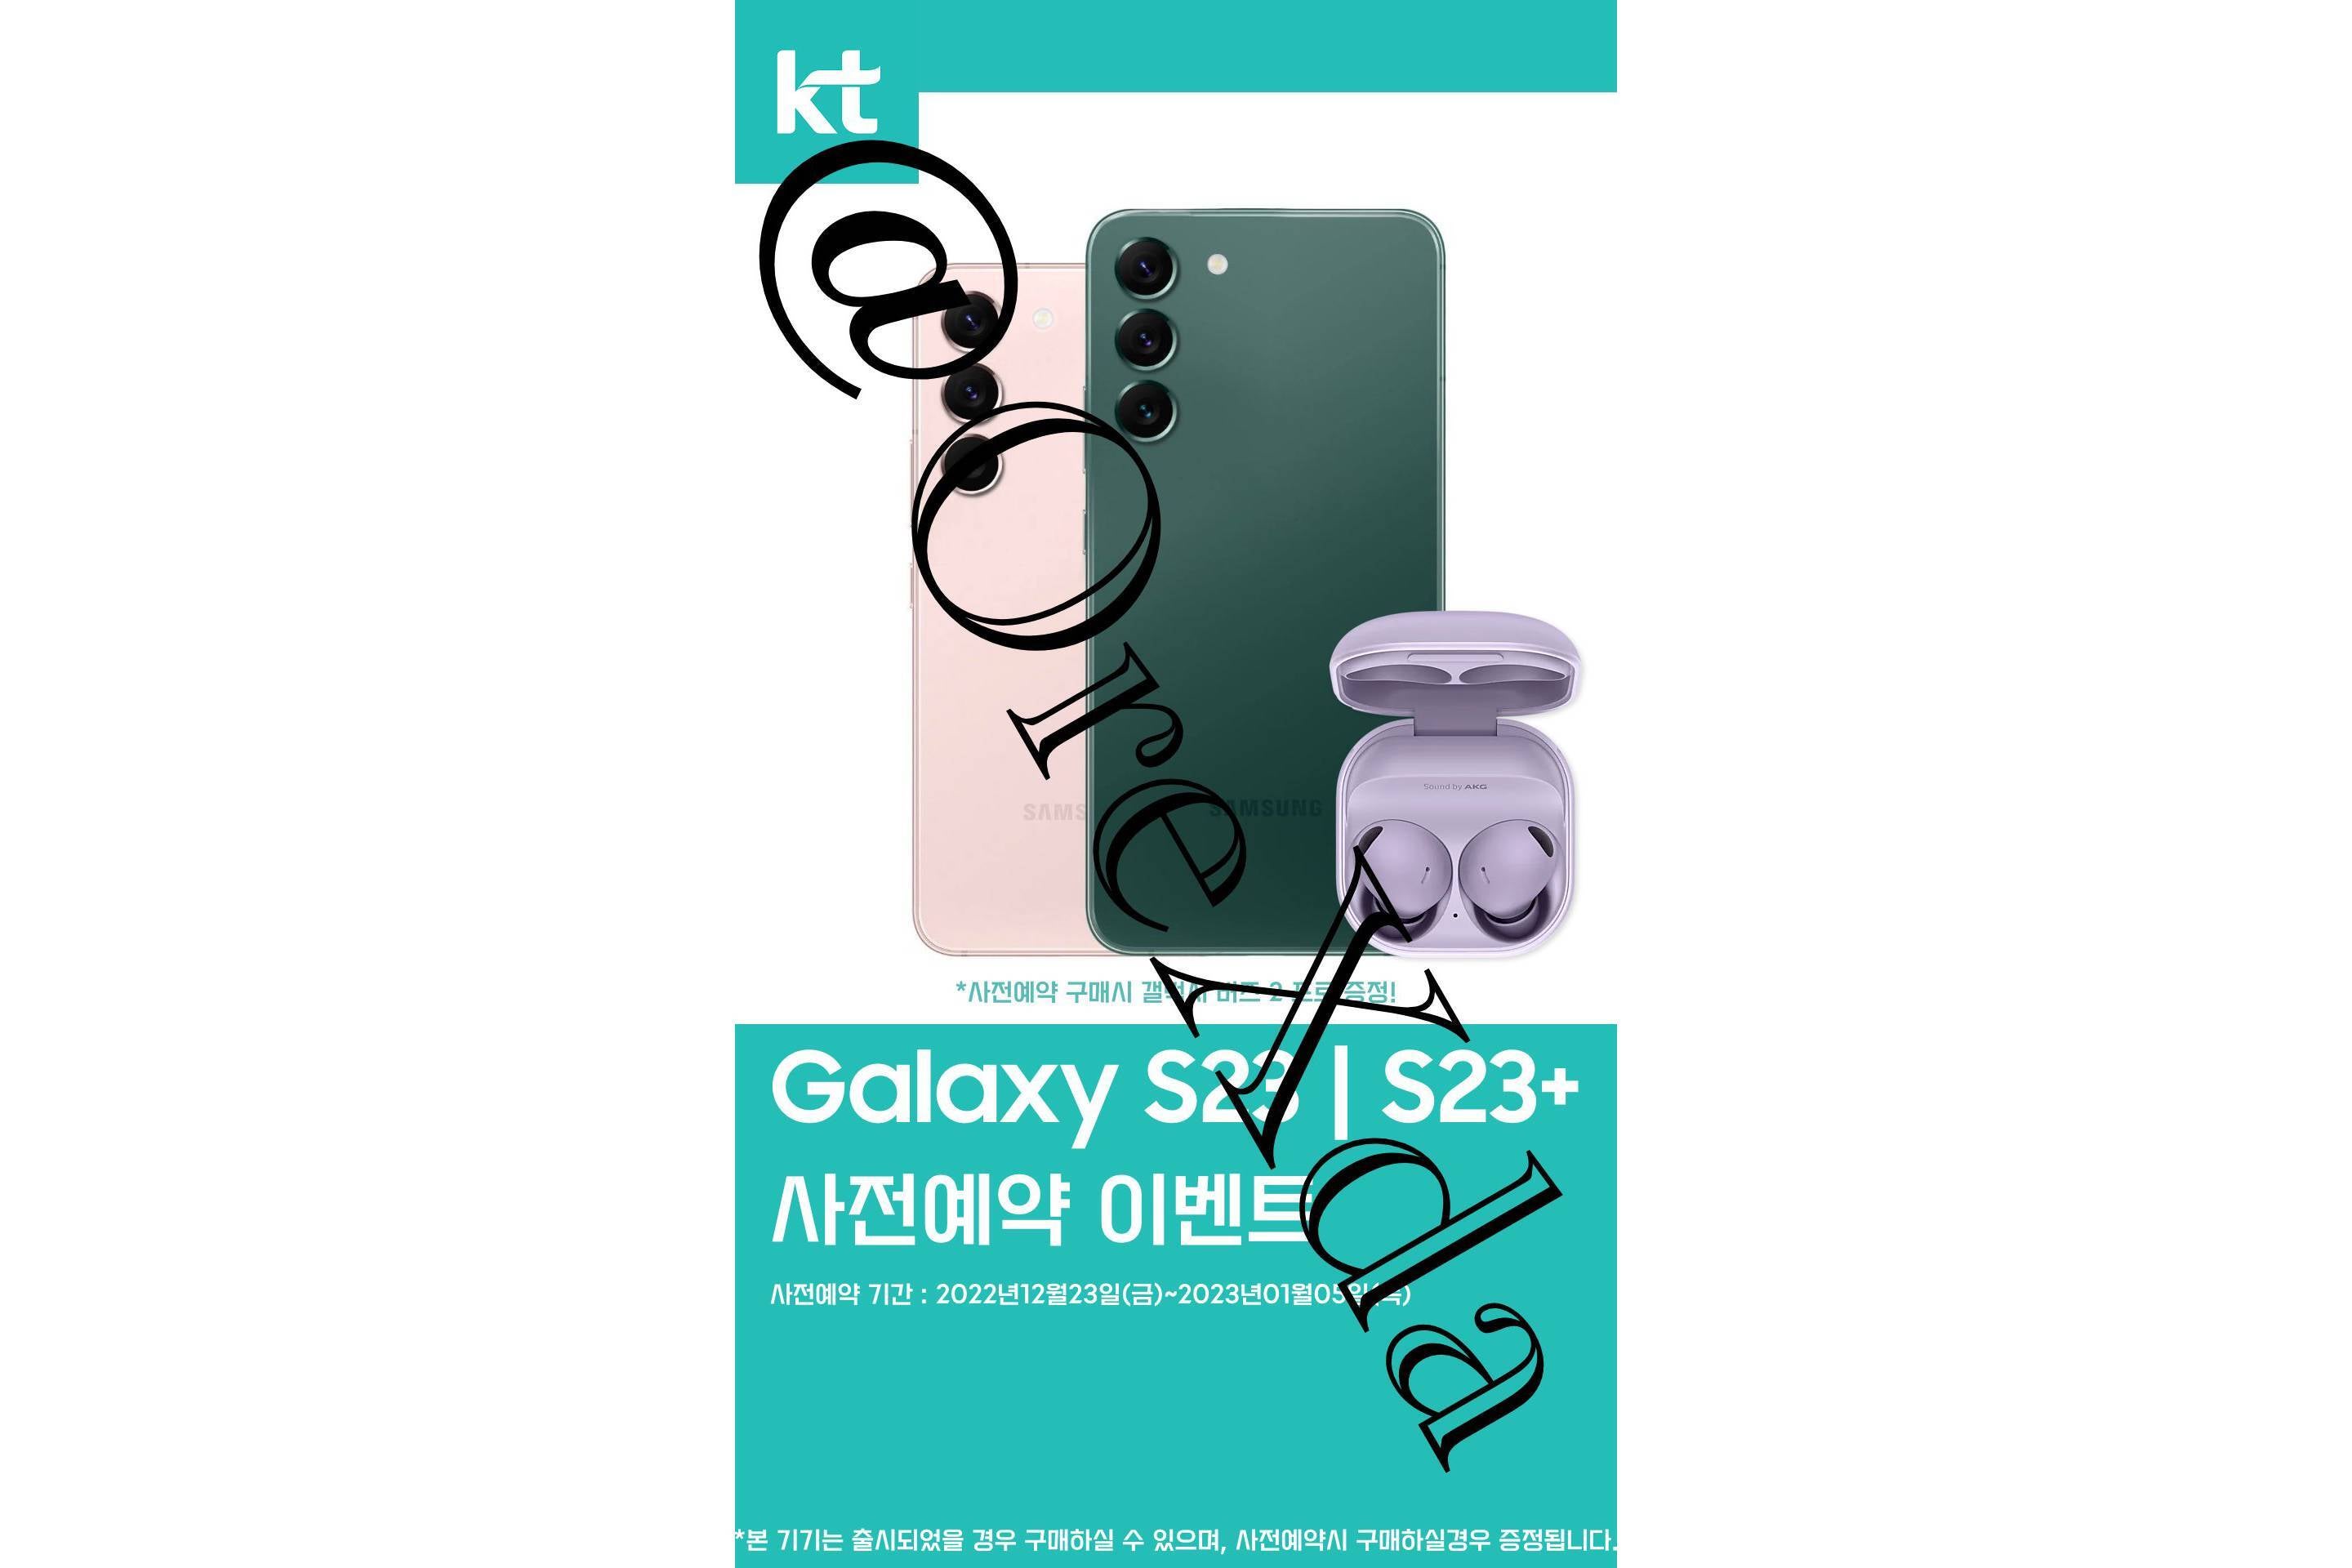 Alleged Galaxy S23 series pre-order poster - Alleged Galaxy S23 pre-order poster shows late 2022 announcement date